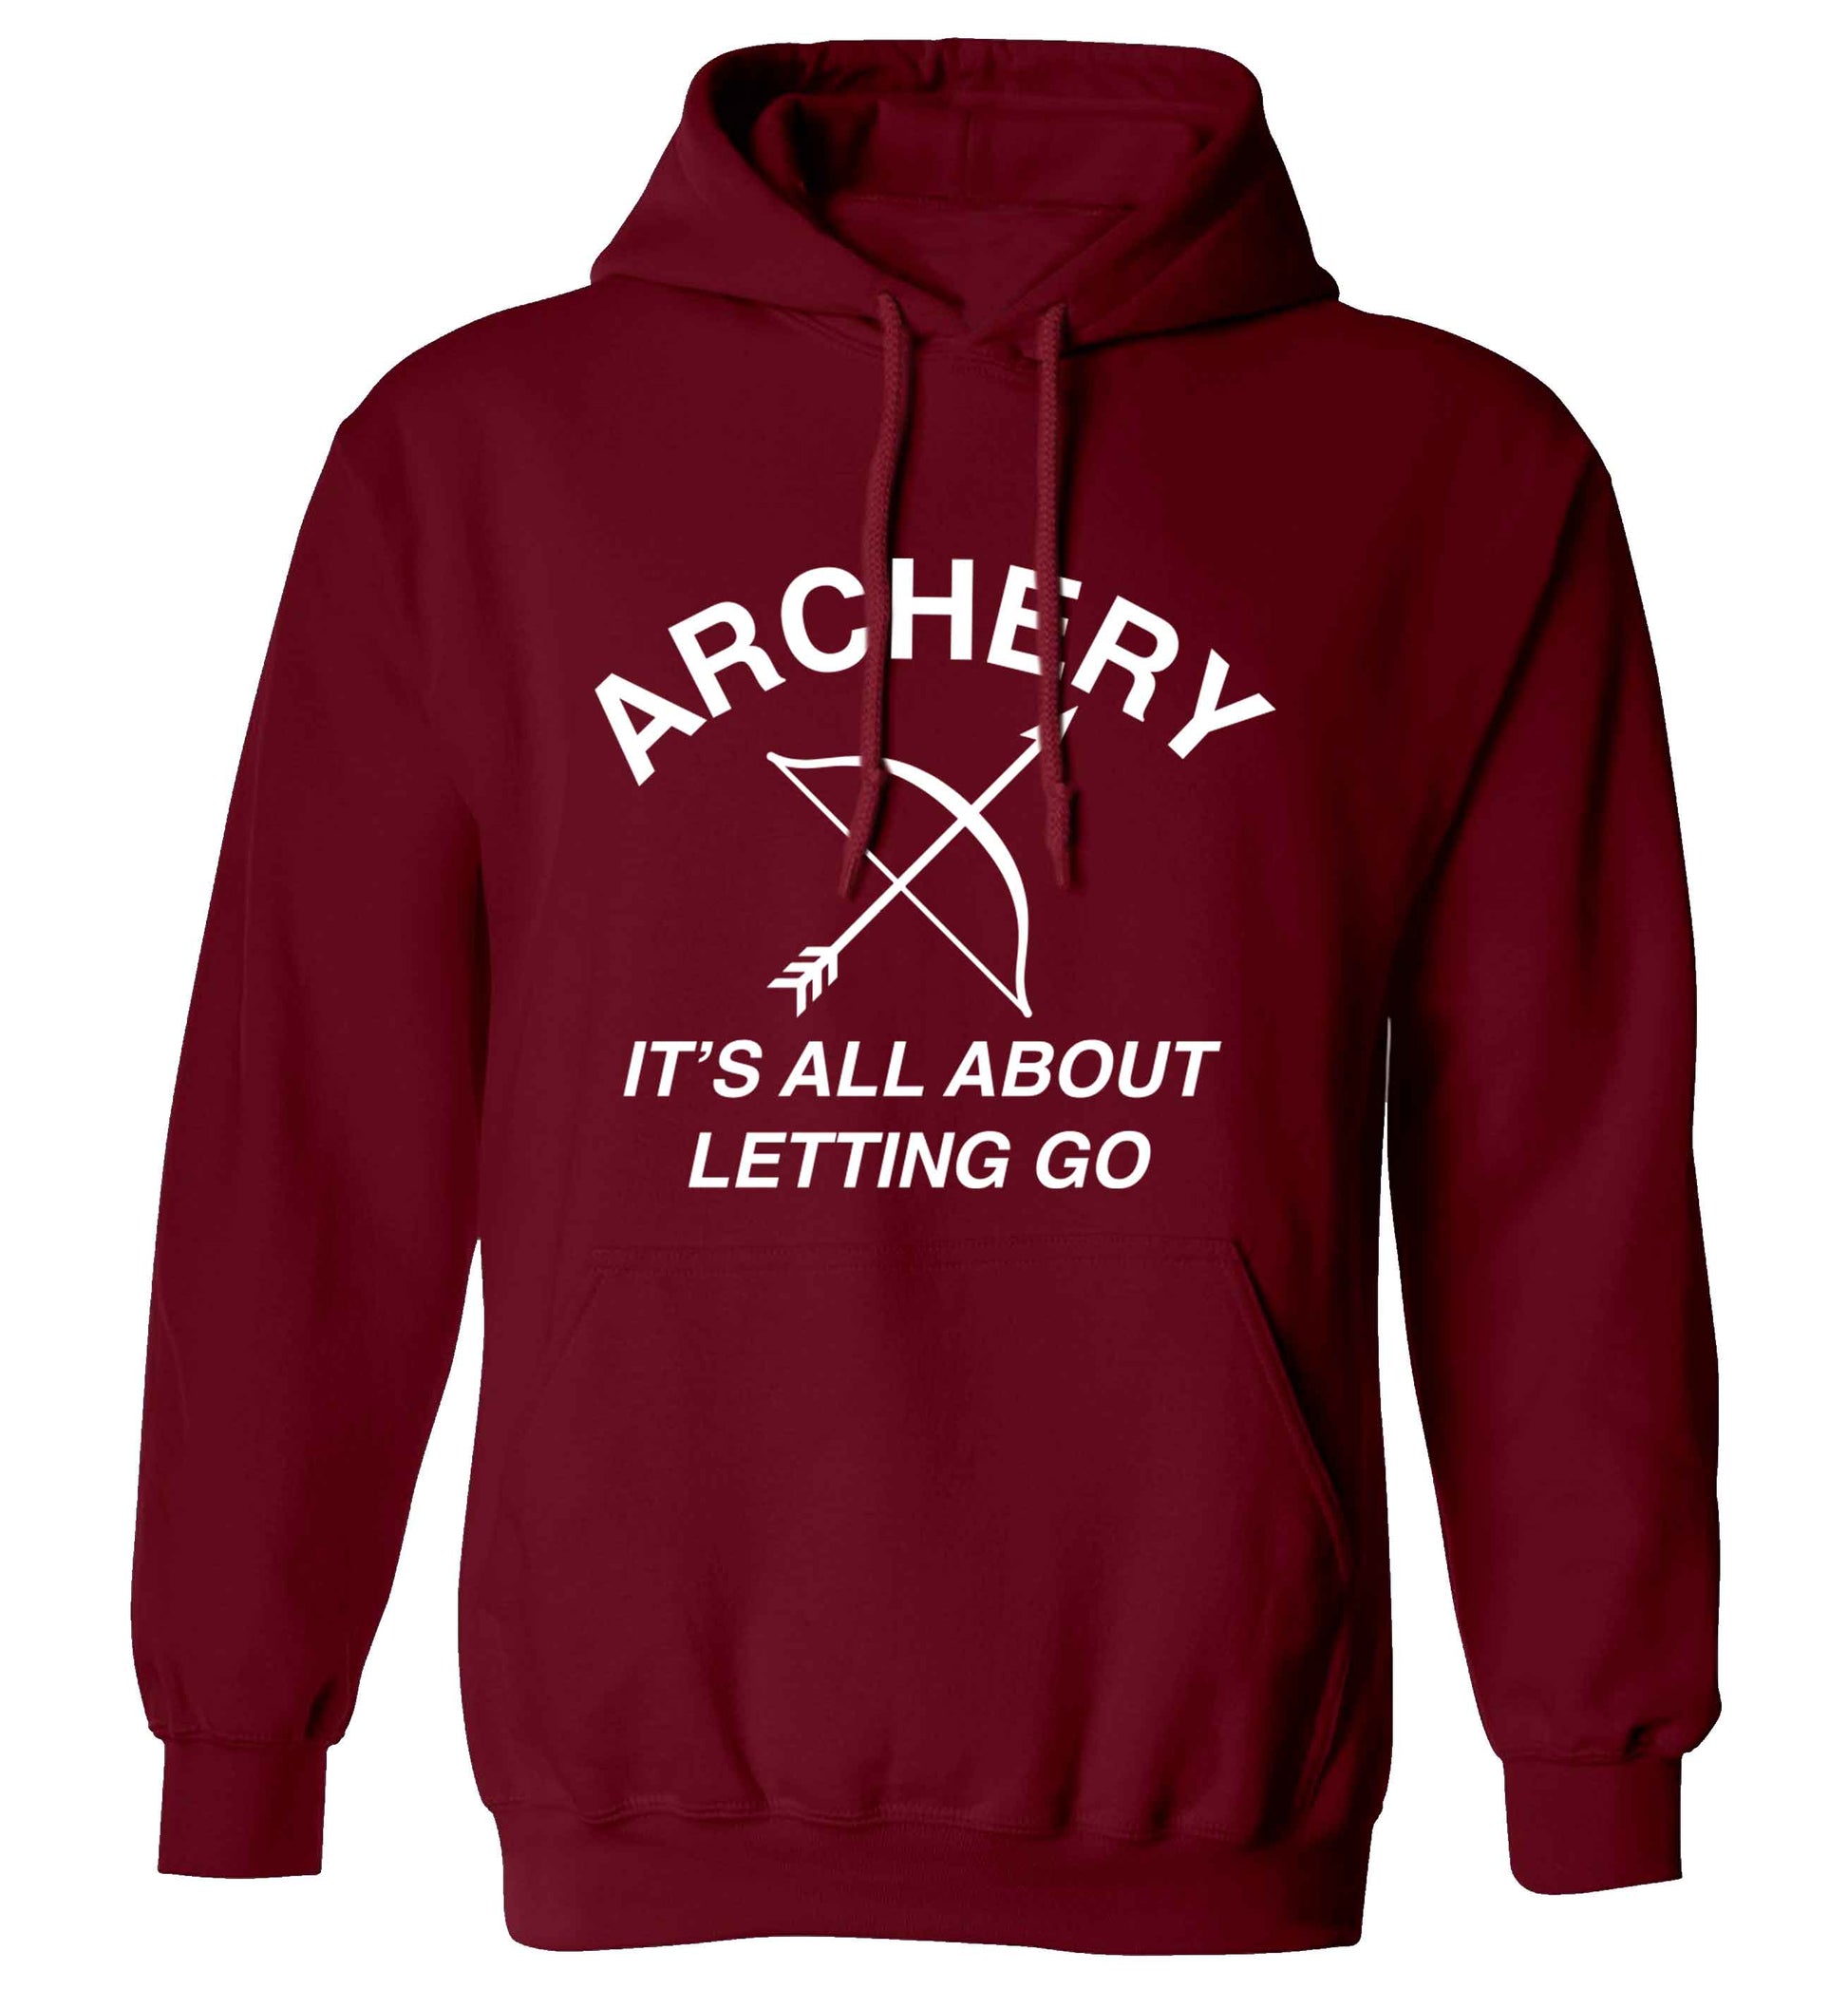 Archery it's all about letting go adults unisex maroon hoodie 2XL